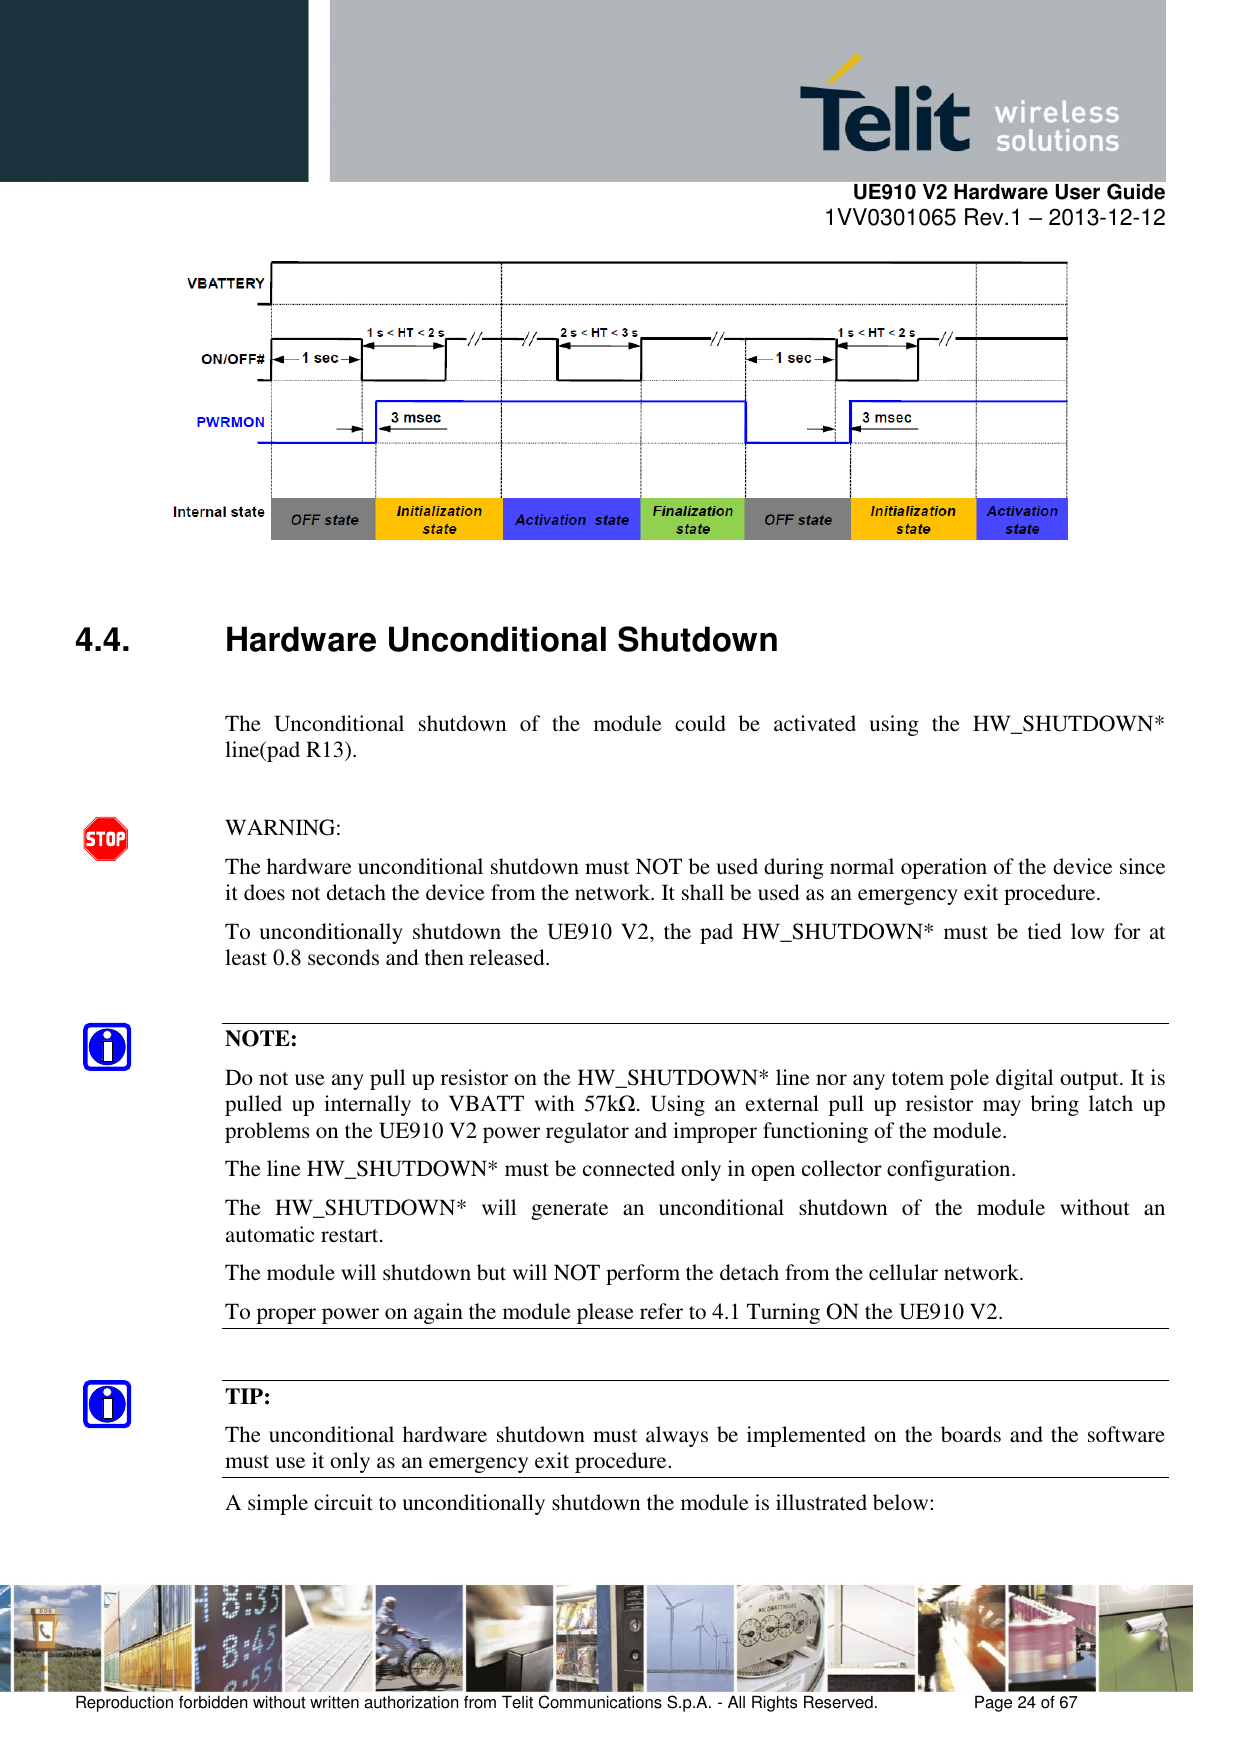     UE910 V2 Hardware User Guide 1VV0301065 Rev.1 – 2013-12-12  Reproduction forbidden without written authorization from Telit Communications S.p.A. - All Rights Reserved.    Page 24 of 67                                                        4.4.  Hardware Unconditional Shutdown  The  Unconditional  shutdown  of  the  module  could  be  activated  using  the  HW_SHUTDOWN* line(pad R13).  WARNING: The hardware unconditional shutdown must NOT be used during normal operation of the device since it does not detach the device from the network. It shall be used as an emergency exit procedure. To unconditionally shutdown the UE910 V2, the pad HW_SHUTDOWN* must be tied  low for at least 0.8 seconds and then released.  NOTE: Do not use any pull up resistor on the HW_SHUTDOWN* line nor any totem pole digital output. It is pulled  up  internally to  VBATT  with  57kΩ.  Using an  external  pull  up  resistor  may bring  latch up problems on the UE910 V2 power regulator and improper functioning of the module.  The line HW_SHUTDOWN* must be connected only in open collector configuration. The  HW_SHUTDOWN*  will  generate  an  unconditional  shutdown  of  the  module  without  an automatic restart. The module will shutdown but will NOT perform the detach from the cellular network. To proper power on again the module please refer to 4.1 Turning ON the UE910 V2.  TIP: The unconditional hardware shutdown must always be implemented on the boards and the software must use it only as an emergency exit procedure. A simple circuit to unconditionally shutdown the module is illustrated below: 